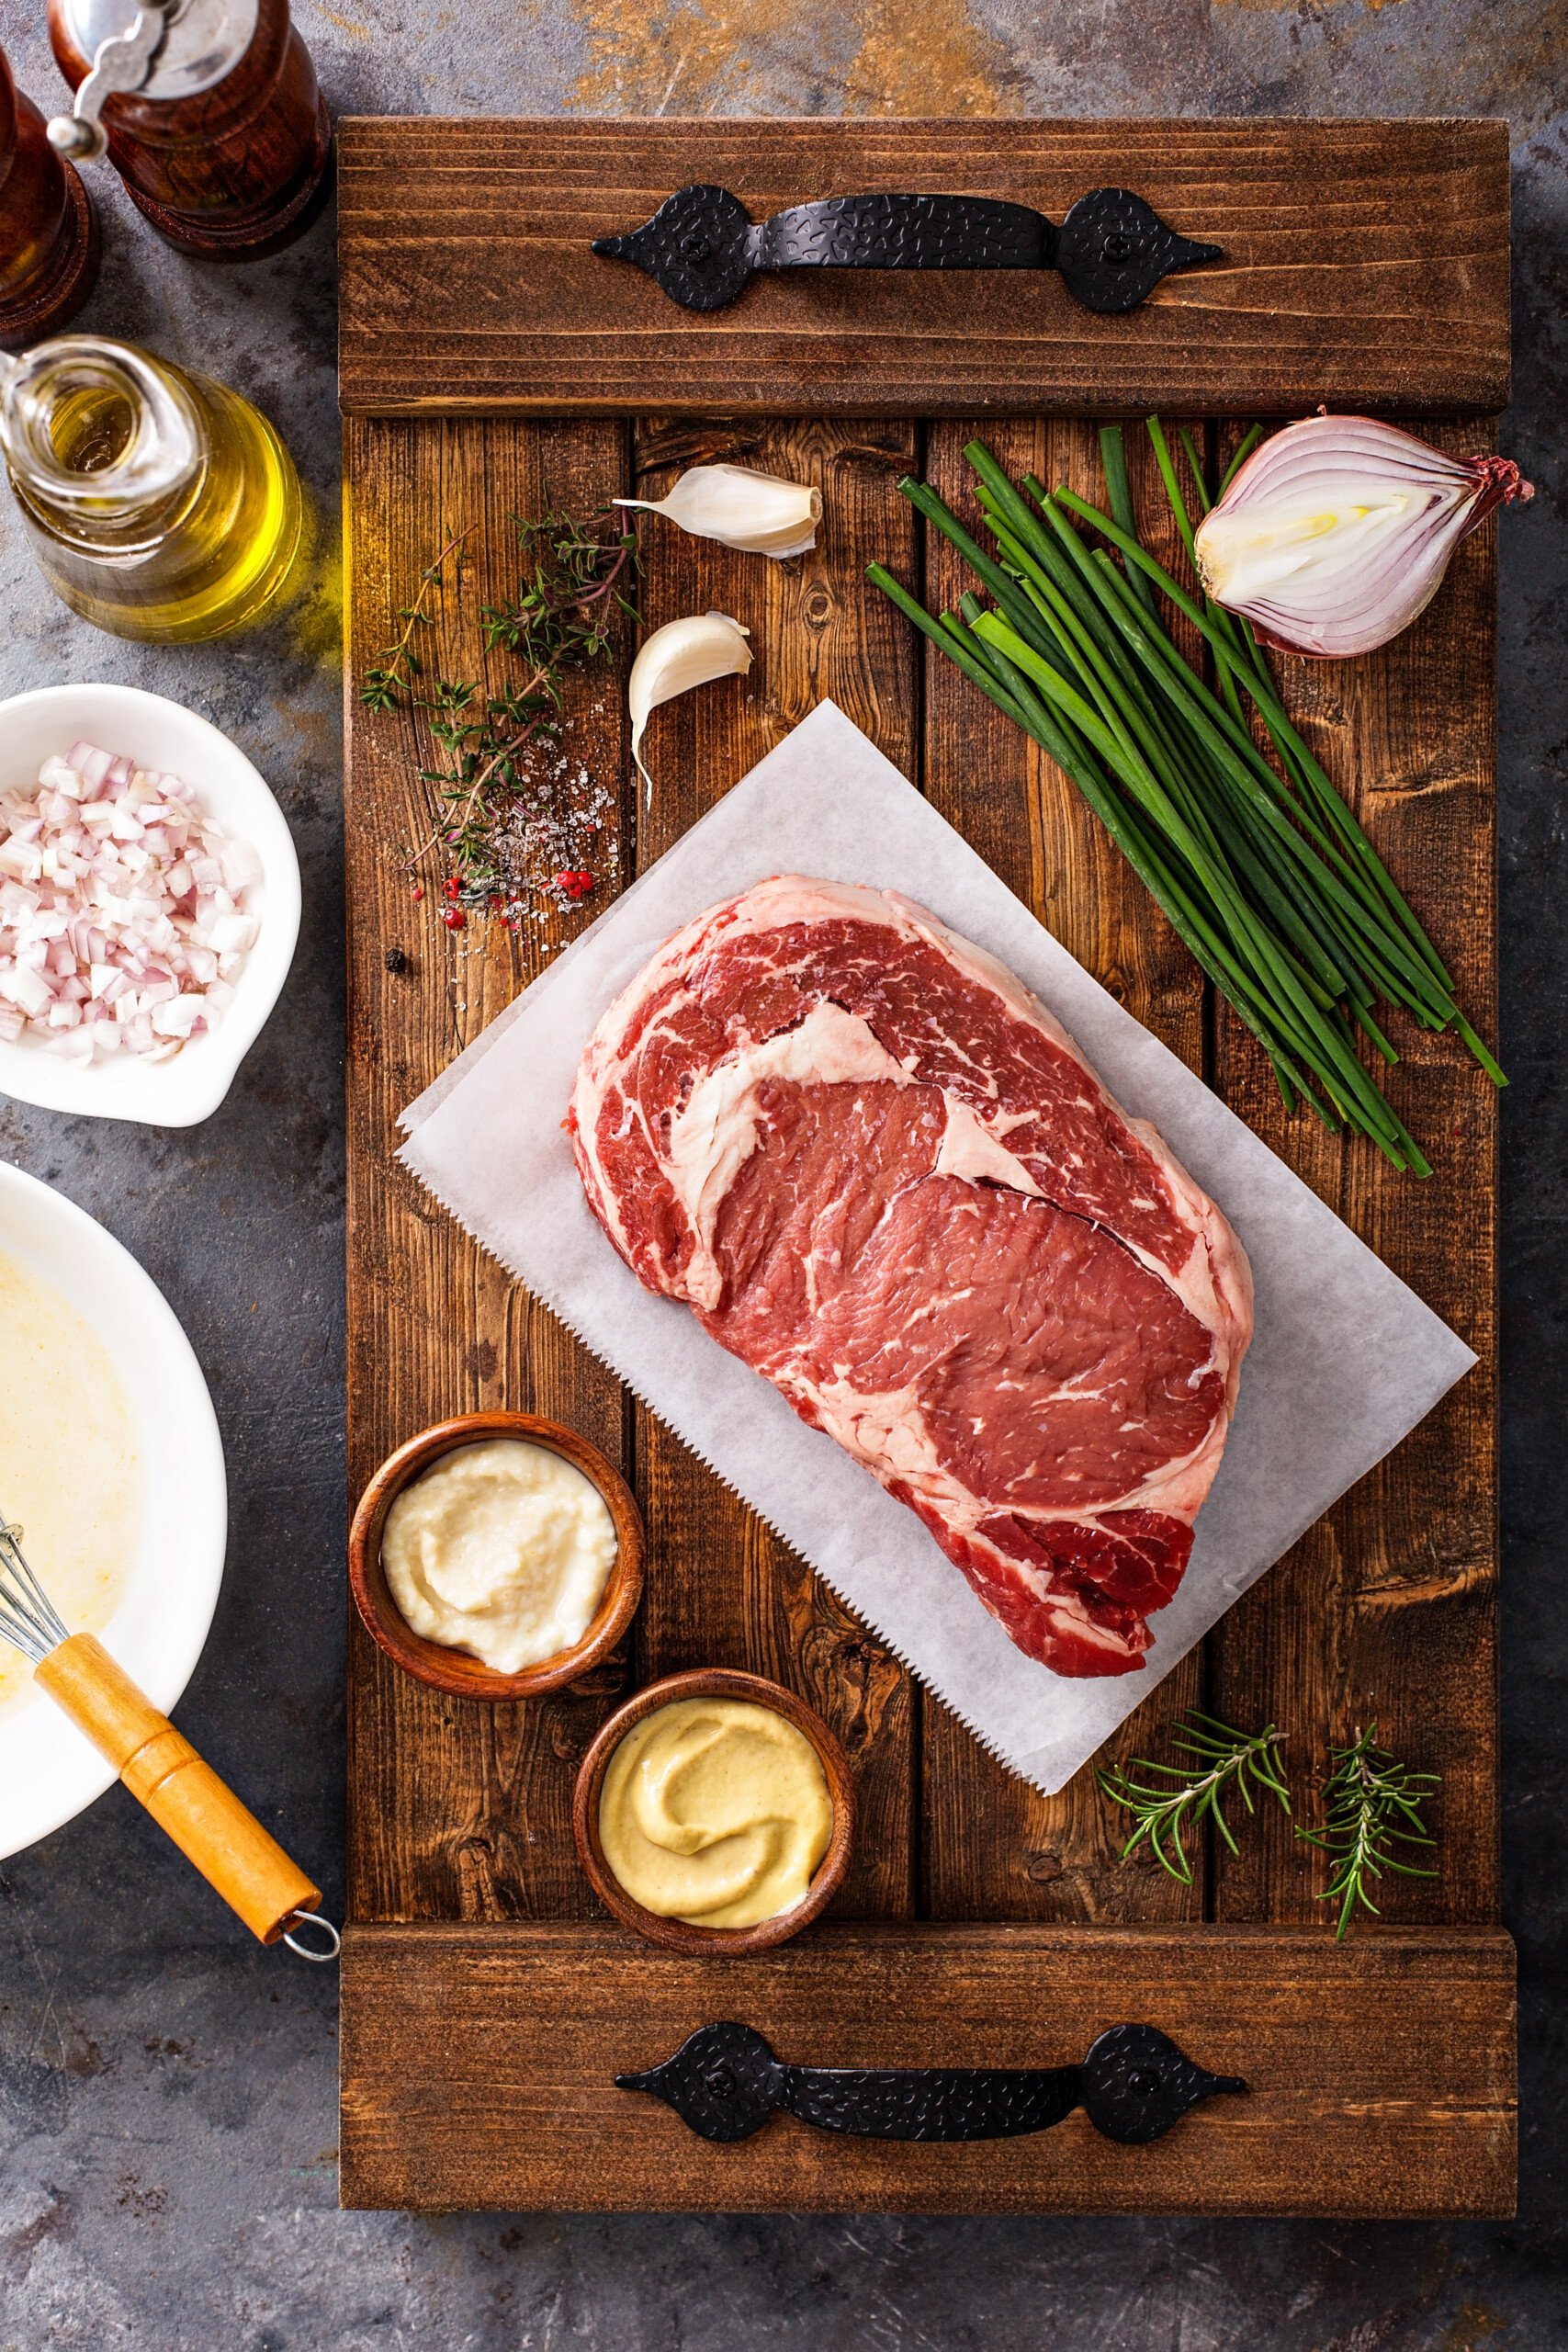 A steak on parchment paper surrounded by bowls of ingredients, fresh herbs and a shallot.